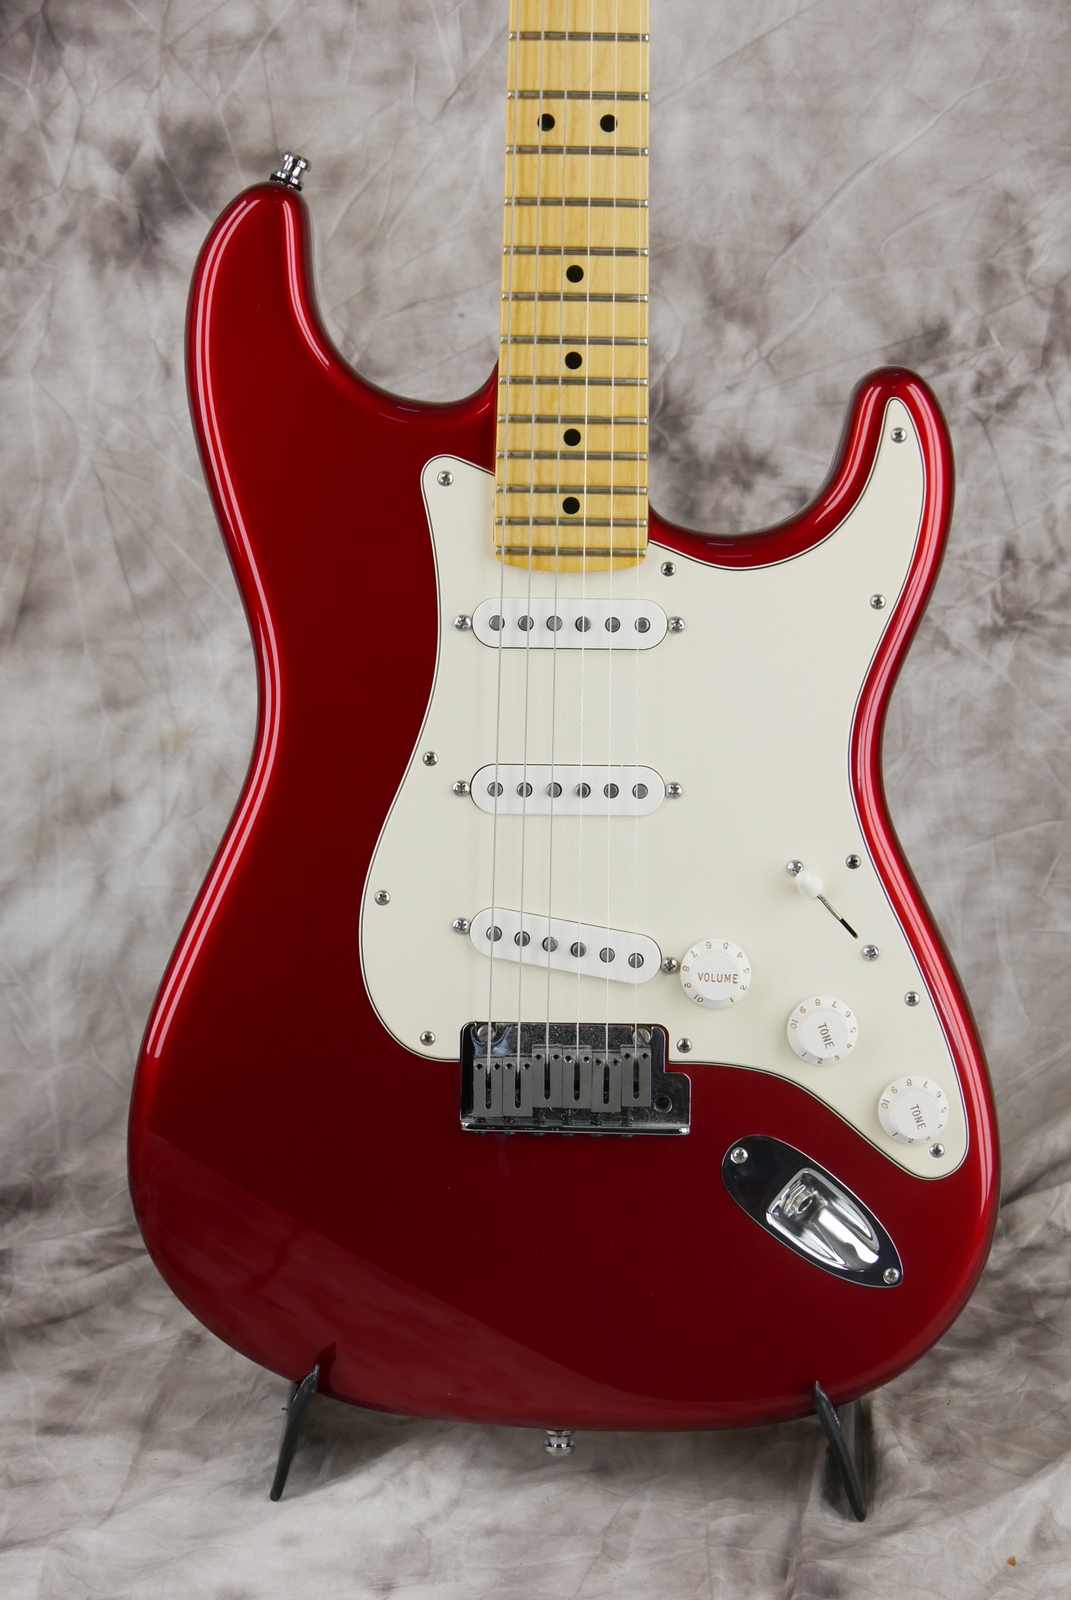 Fender_Stratocaster_USA_built_from_parts_candy_apple_red_2015-003.JPG